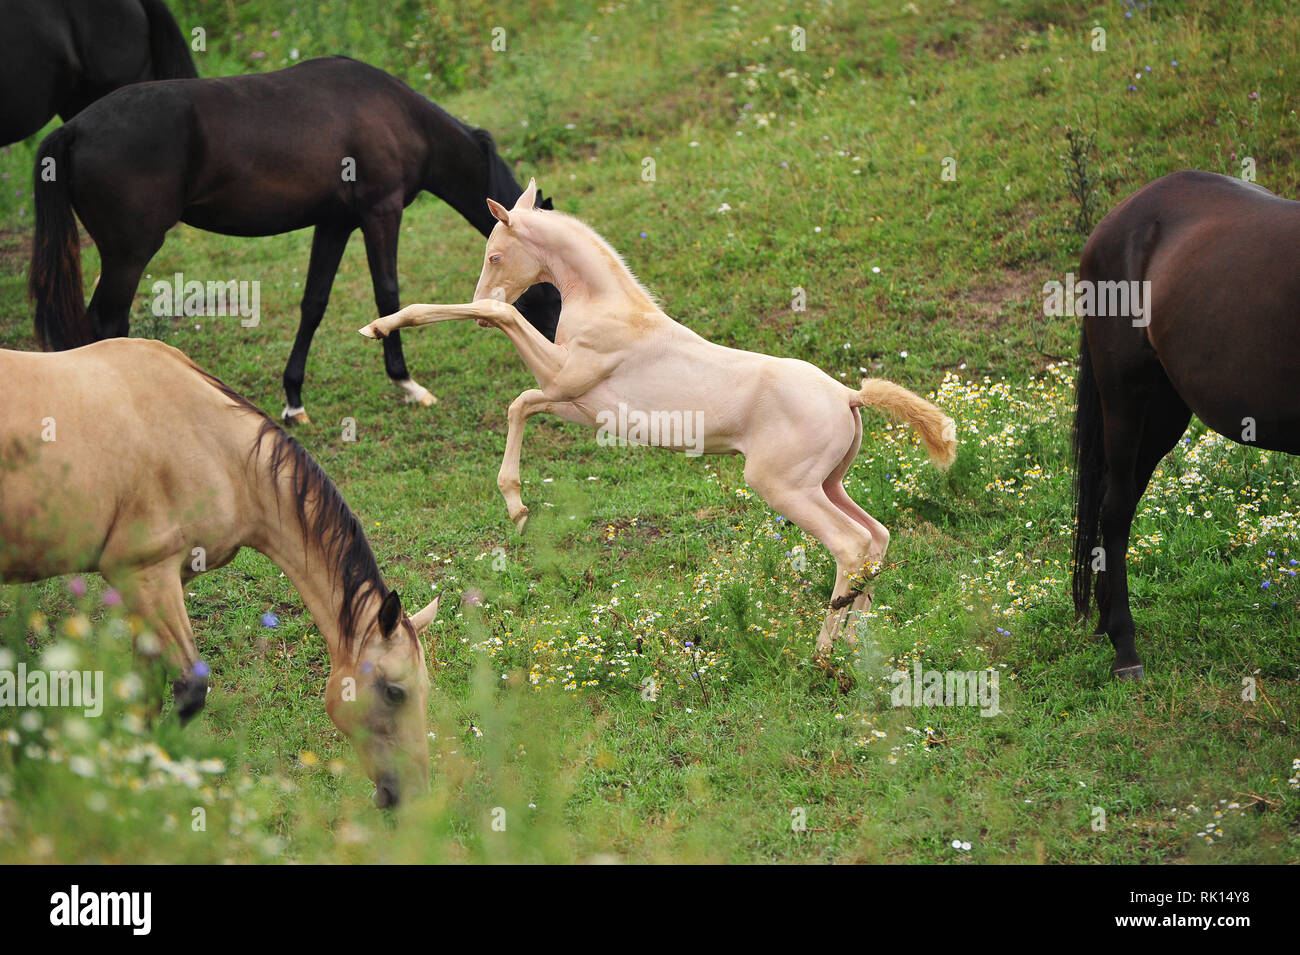 Funny perlino foal playing and rearing in the middle of a herd in summer pasture. Horizontal, side view, in motion. Stock Photo